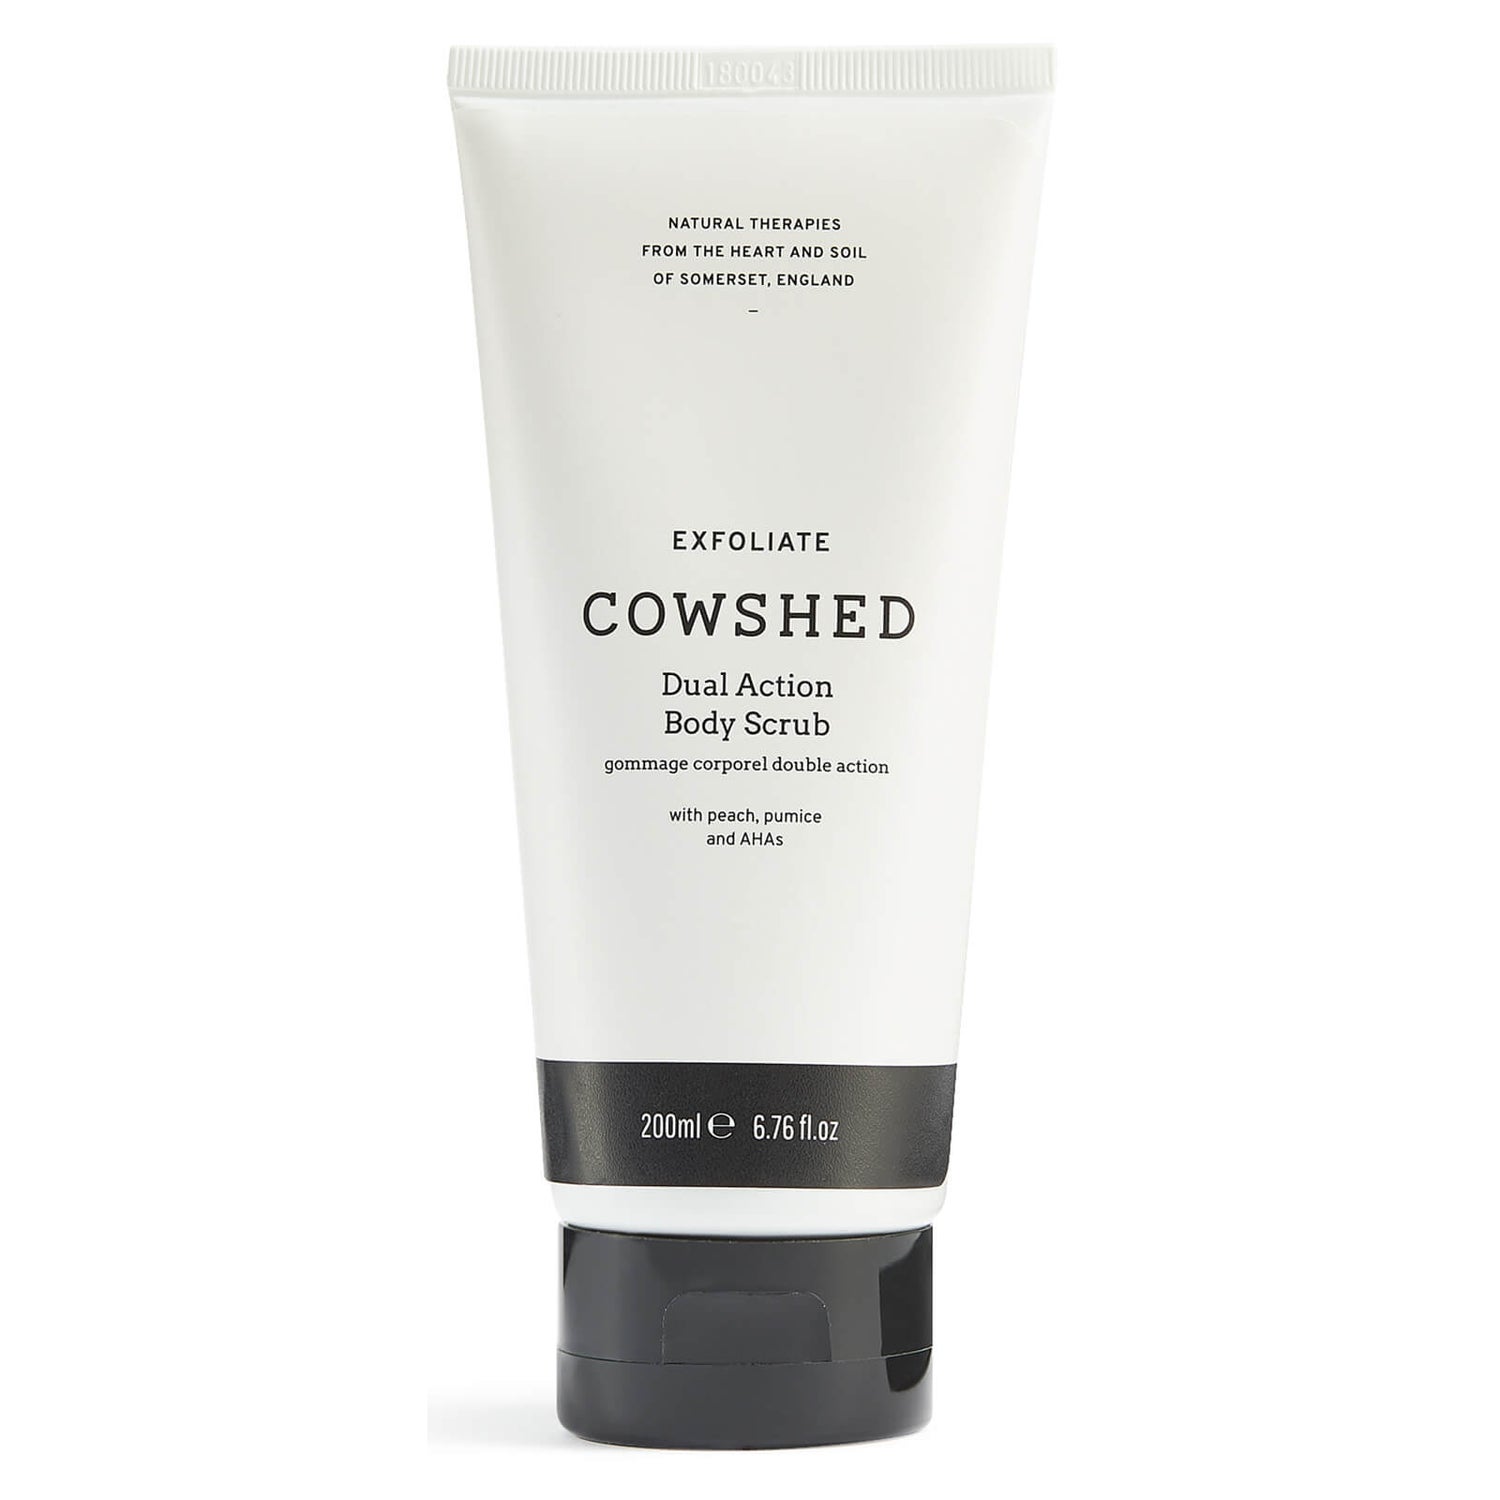 Cowshed EXFOLIATE Dual Action Body Scrub